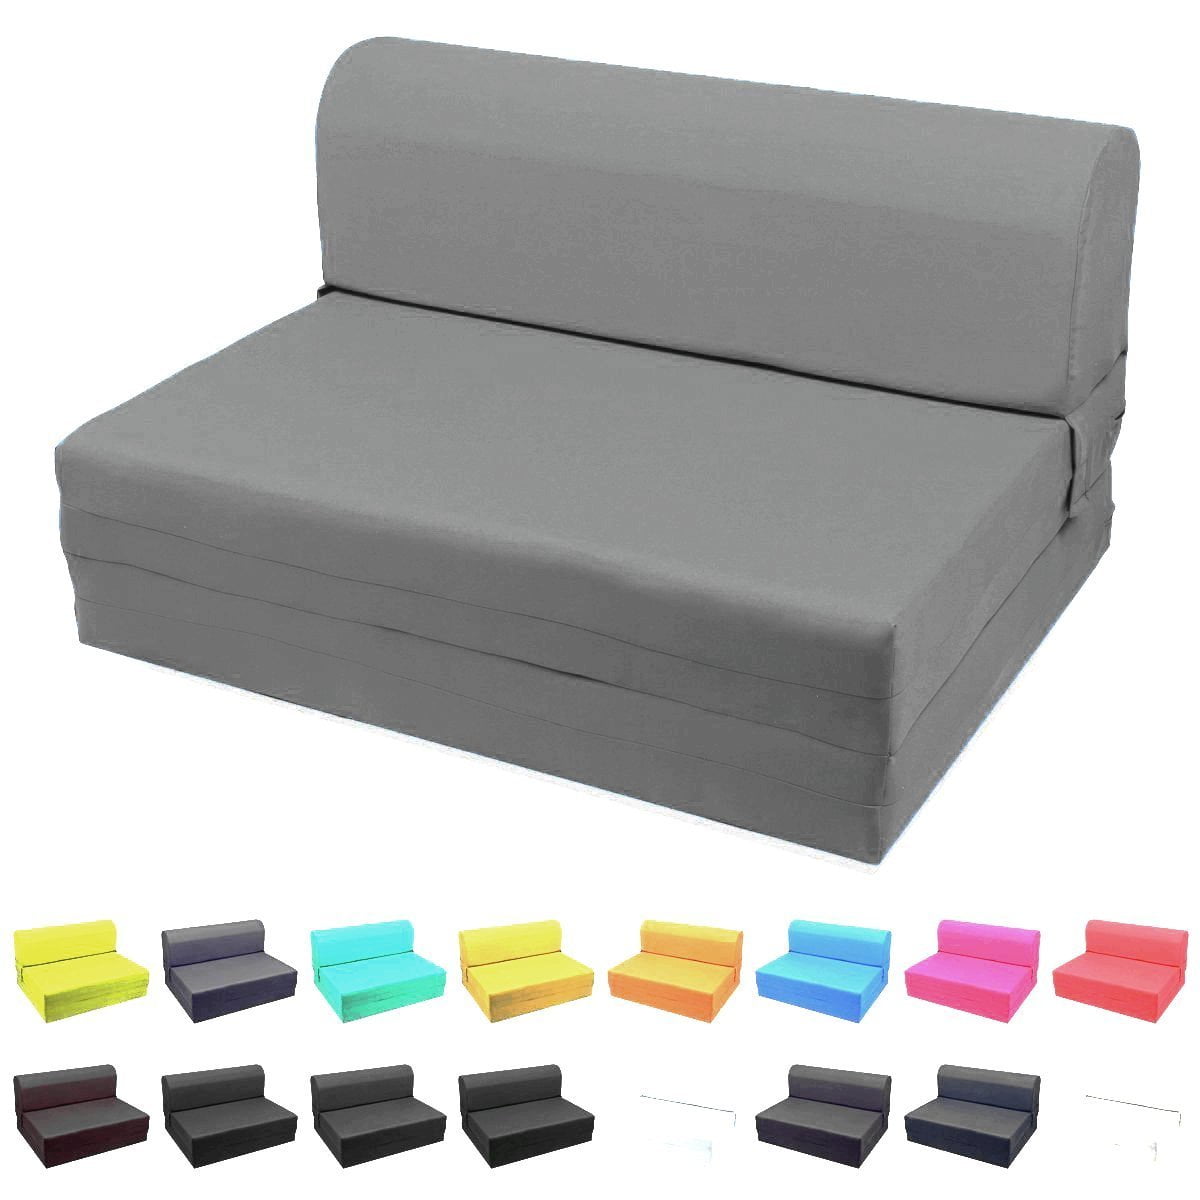 Magshion Sleeper Chair Folding Foam Bed, Single Fold Out Chair Bed